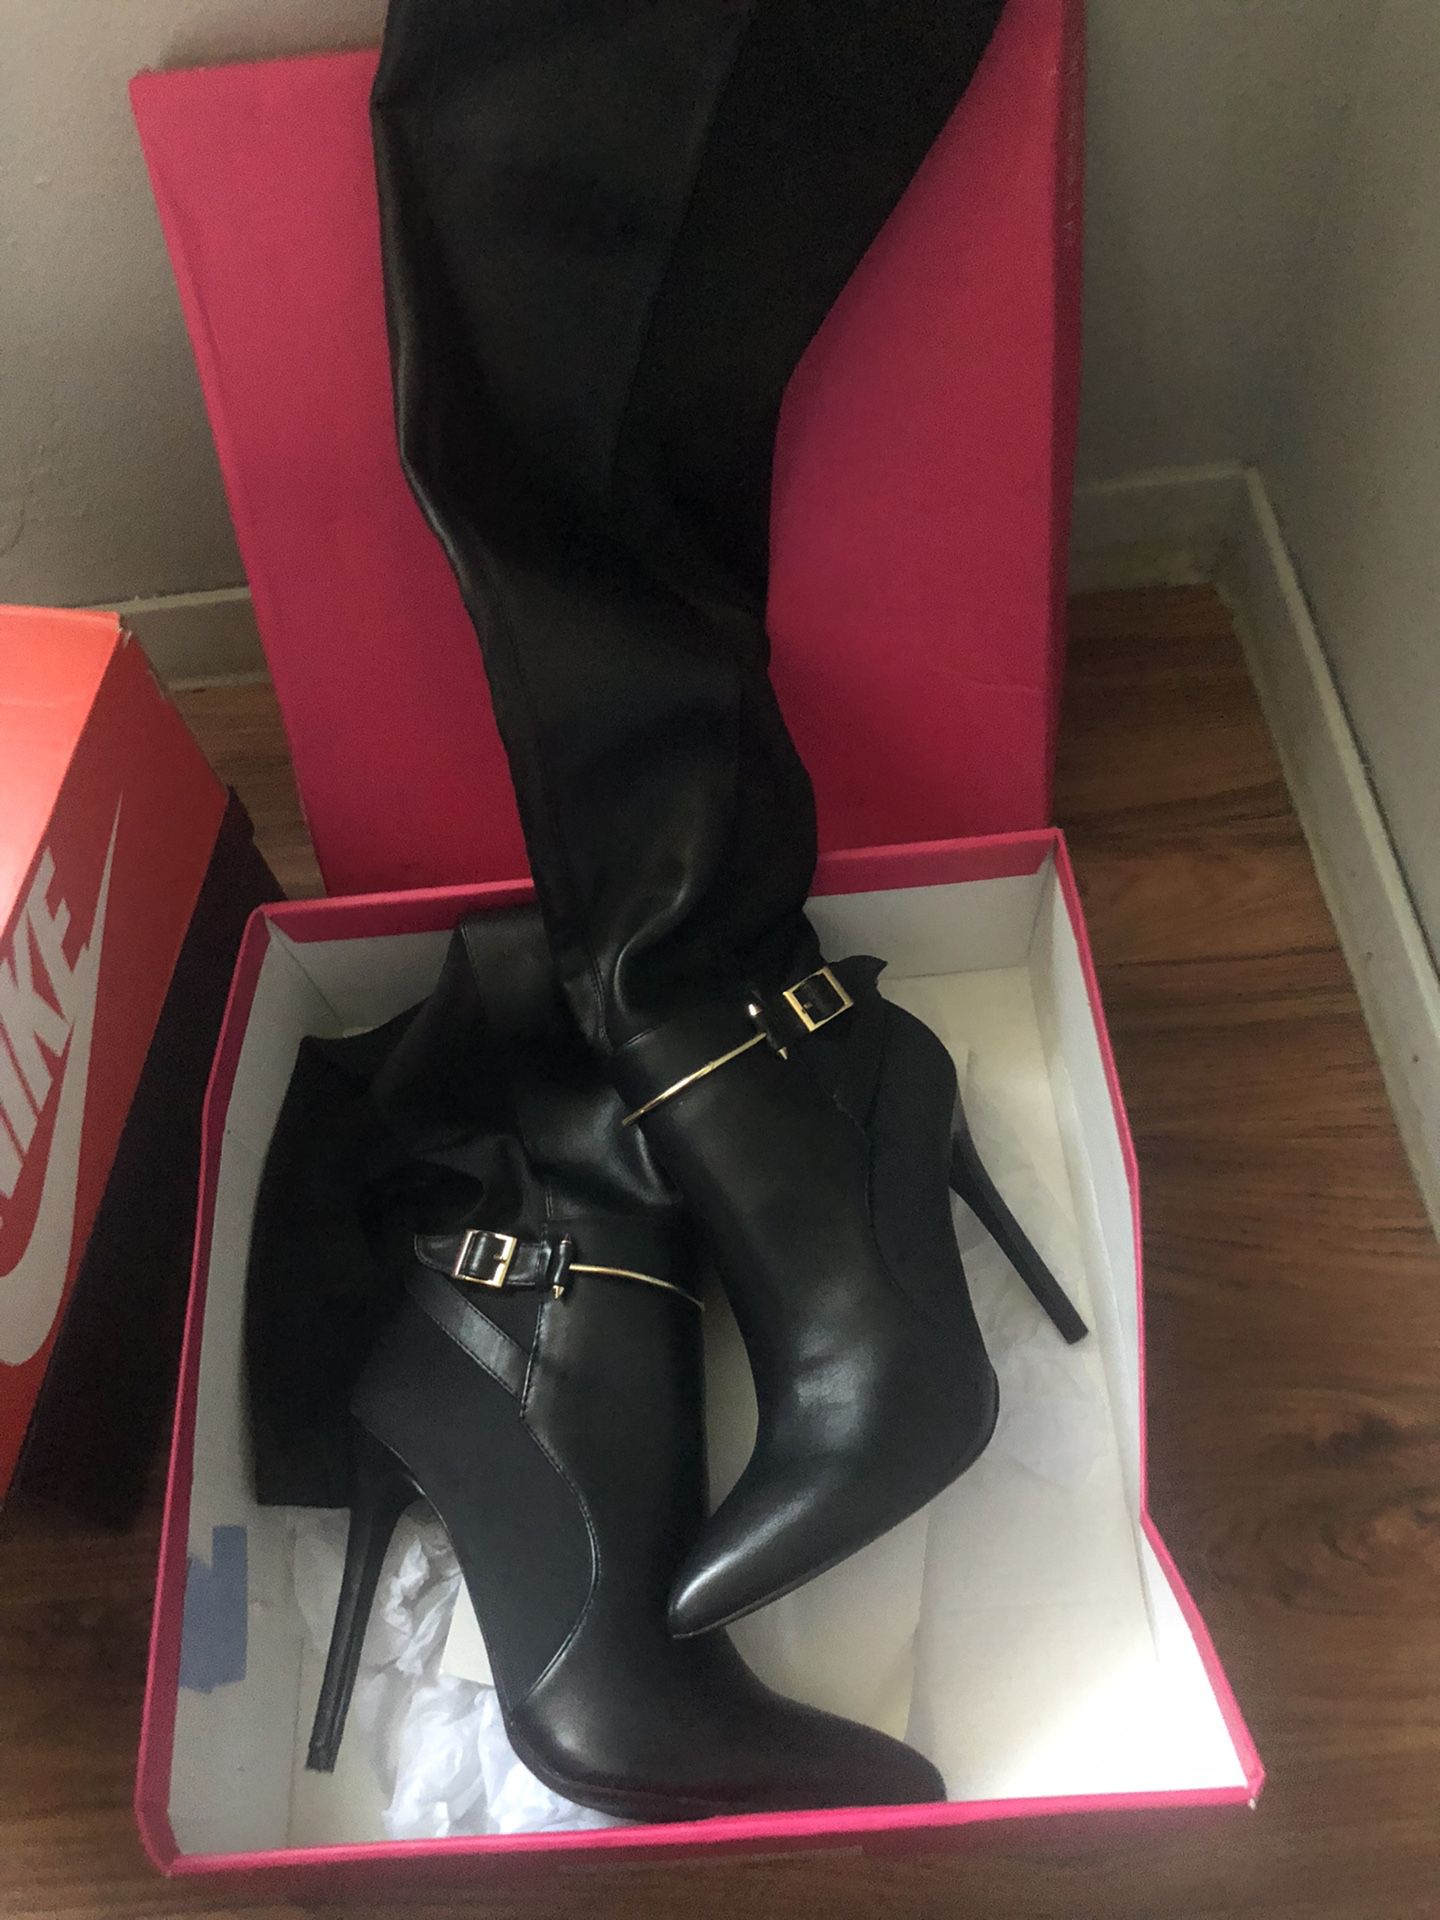 Size 8 1/2 Thigh High Boots From SHOE DAZZLE!